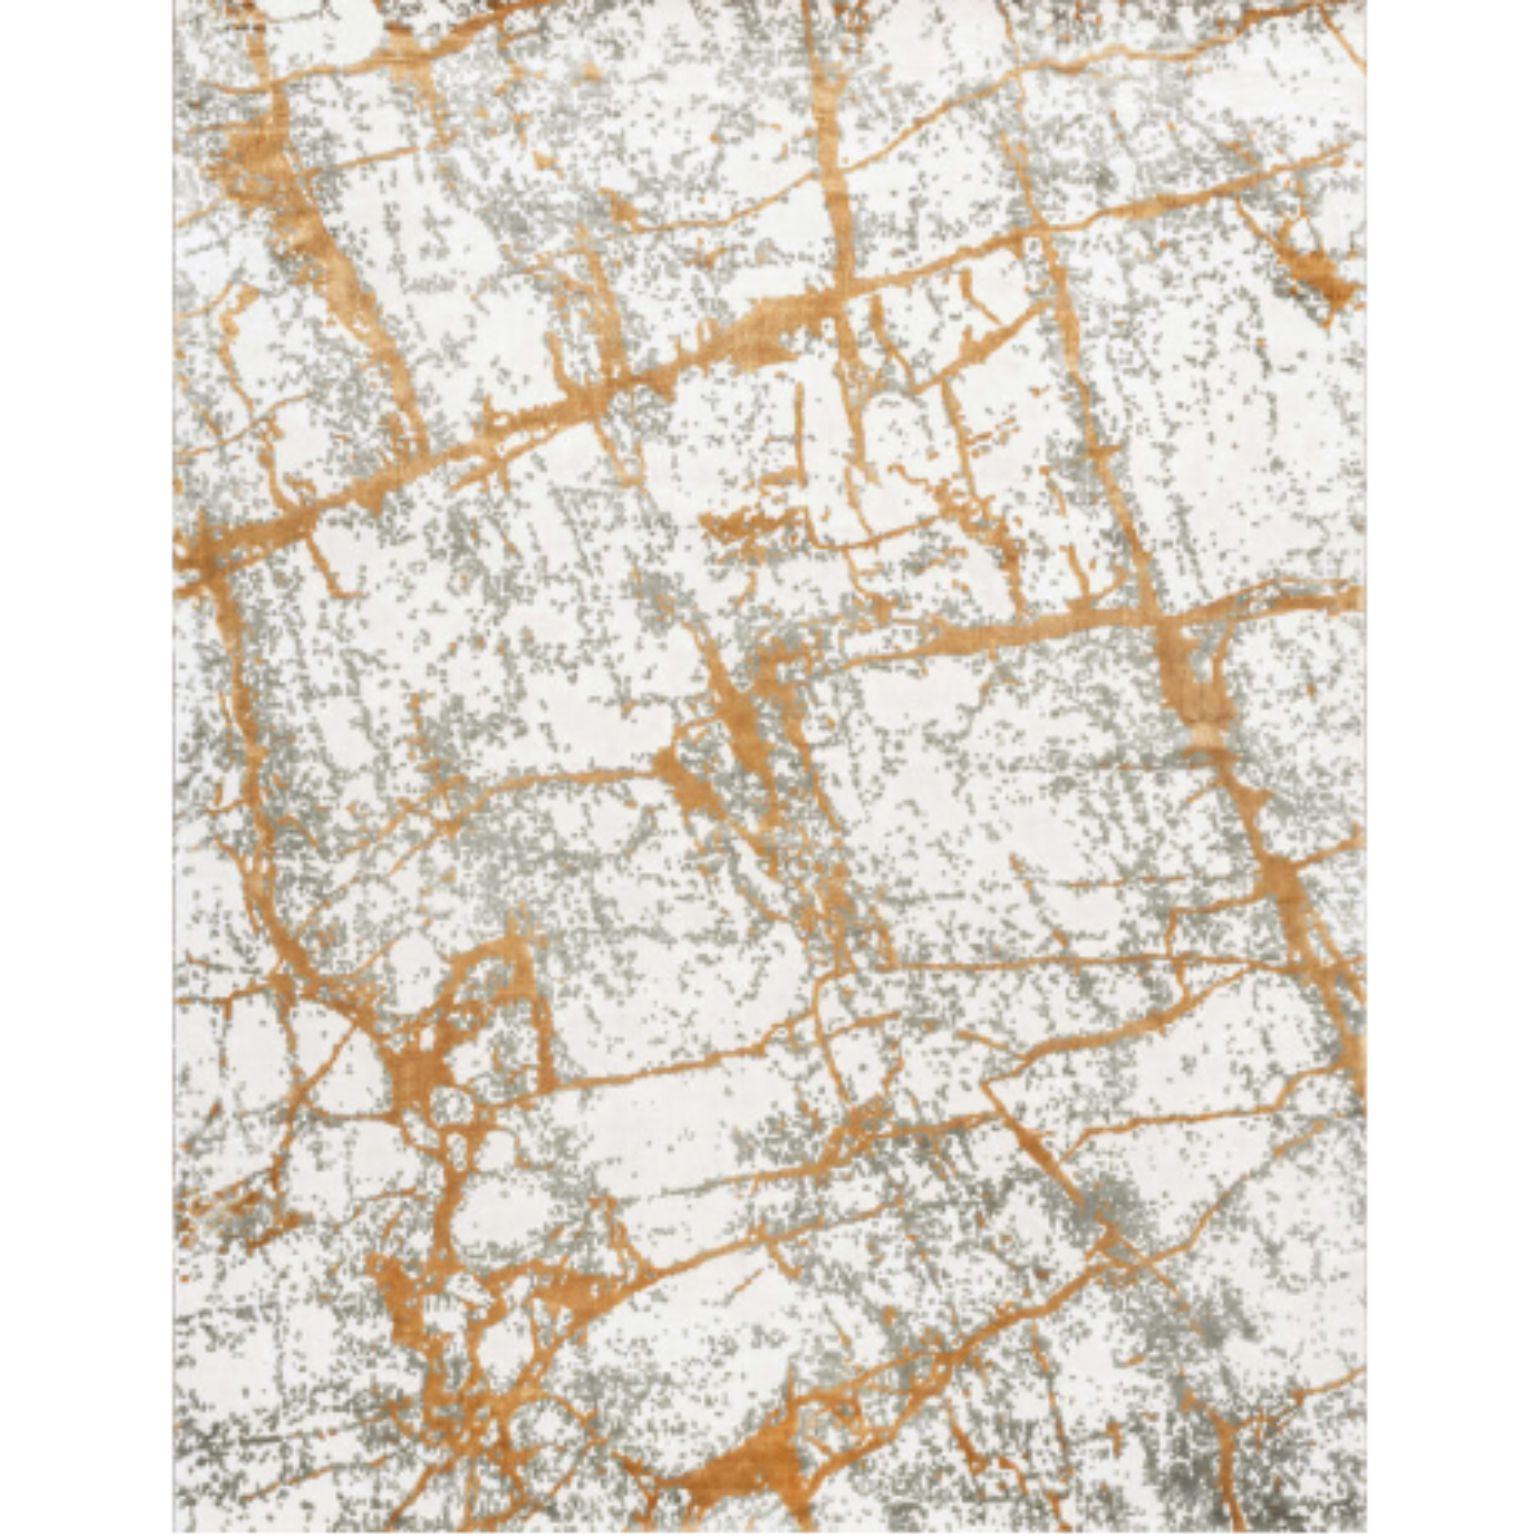 KINTSUGI 200 rug by Illulian
Dimensions: D300 x H200 cm 
Materials: Wool 50%, Silk 50%
Variations available and prices may vary according to materials and sizes. 

Illulian, historic and prestigious rug company brand, internationally renowned